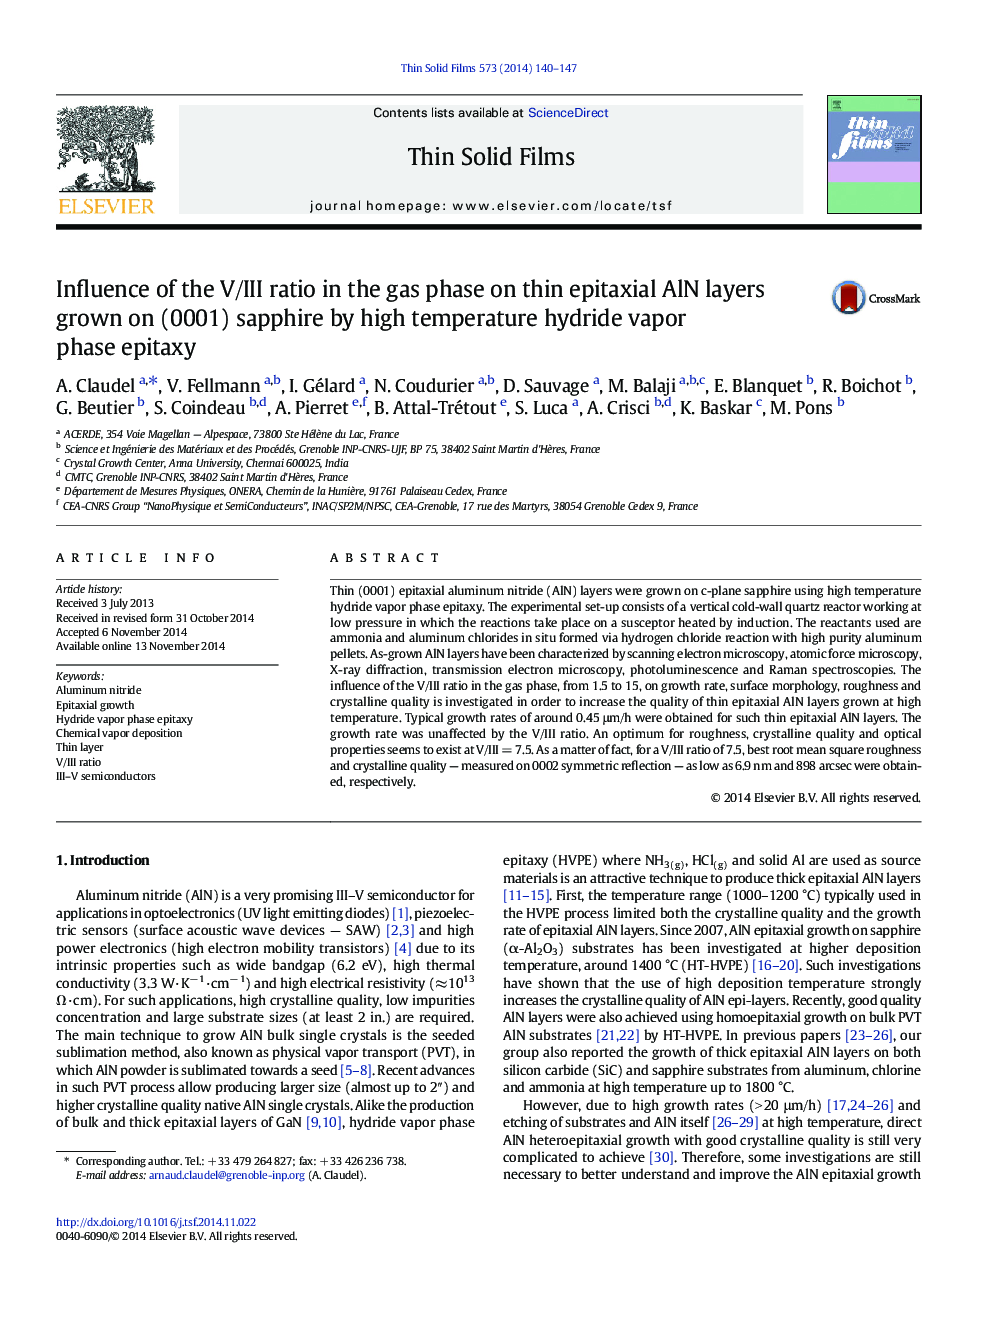 Influence of the V/III ratio in the gas phase on thin epitaxial AlN layers grown on (0001) sapphire by high temperature hydride vapor phase epitaxy